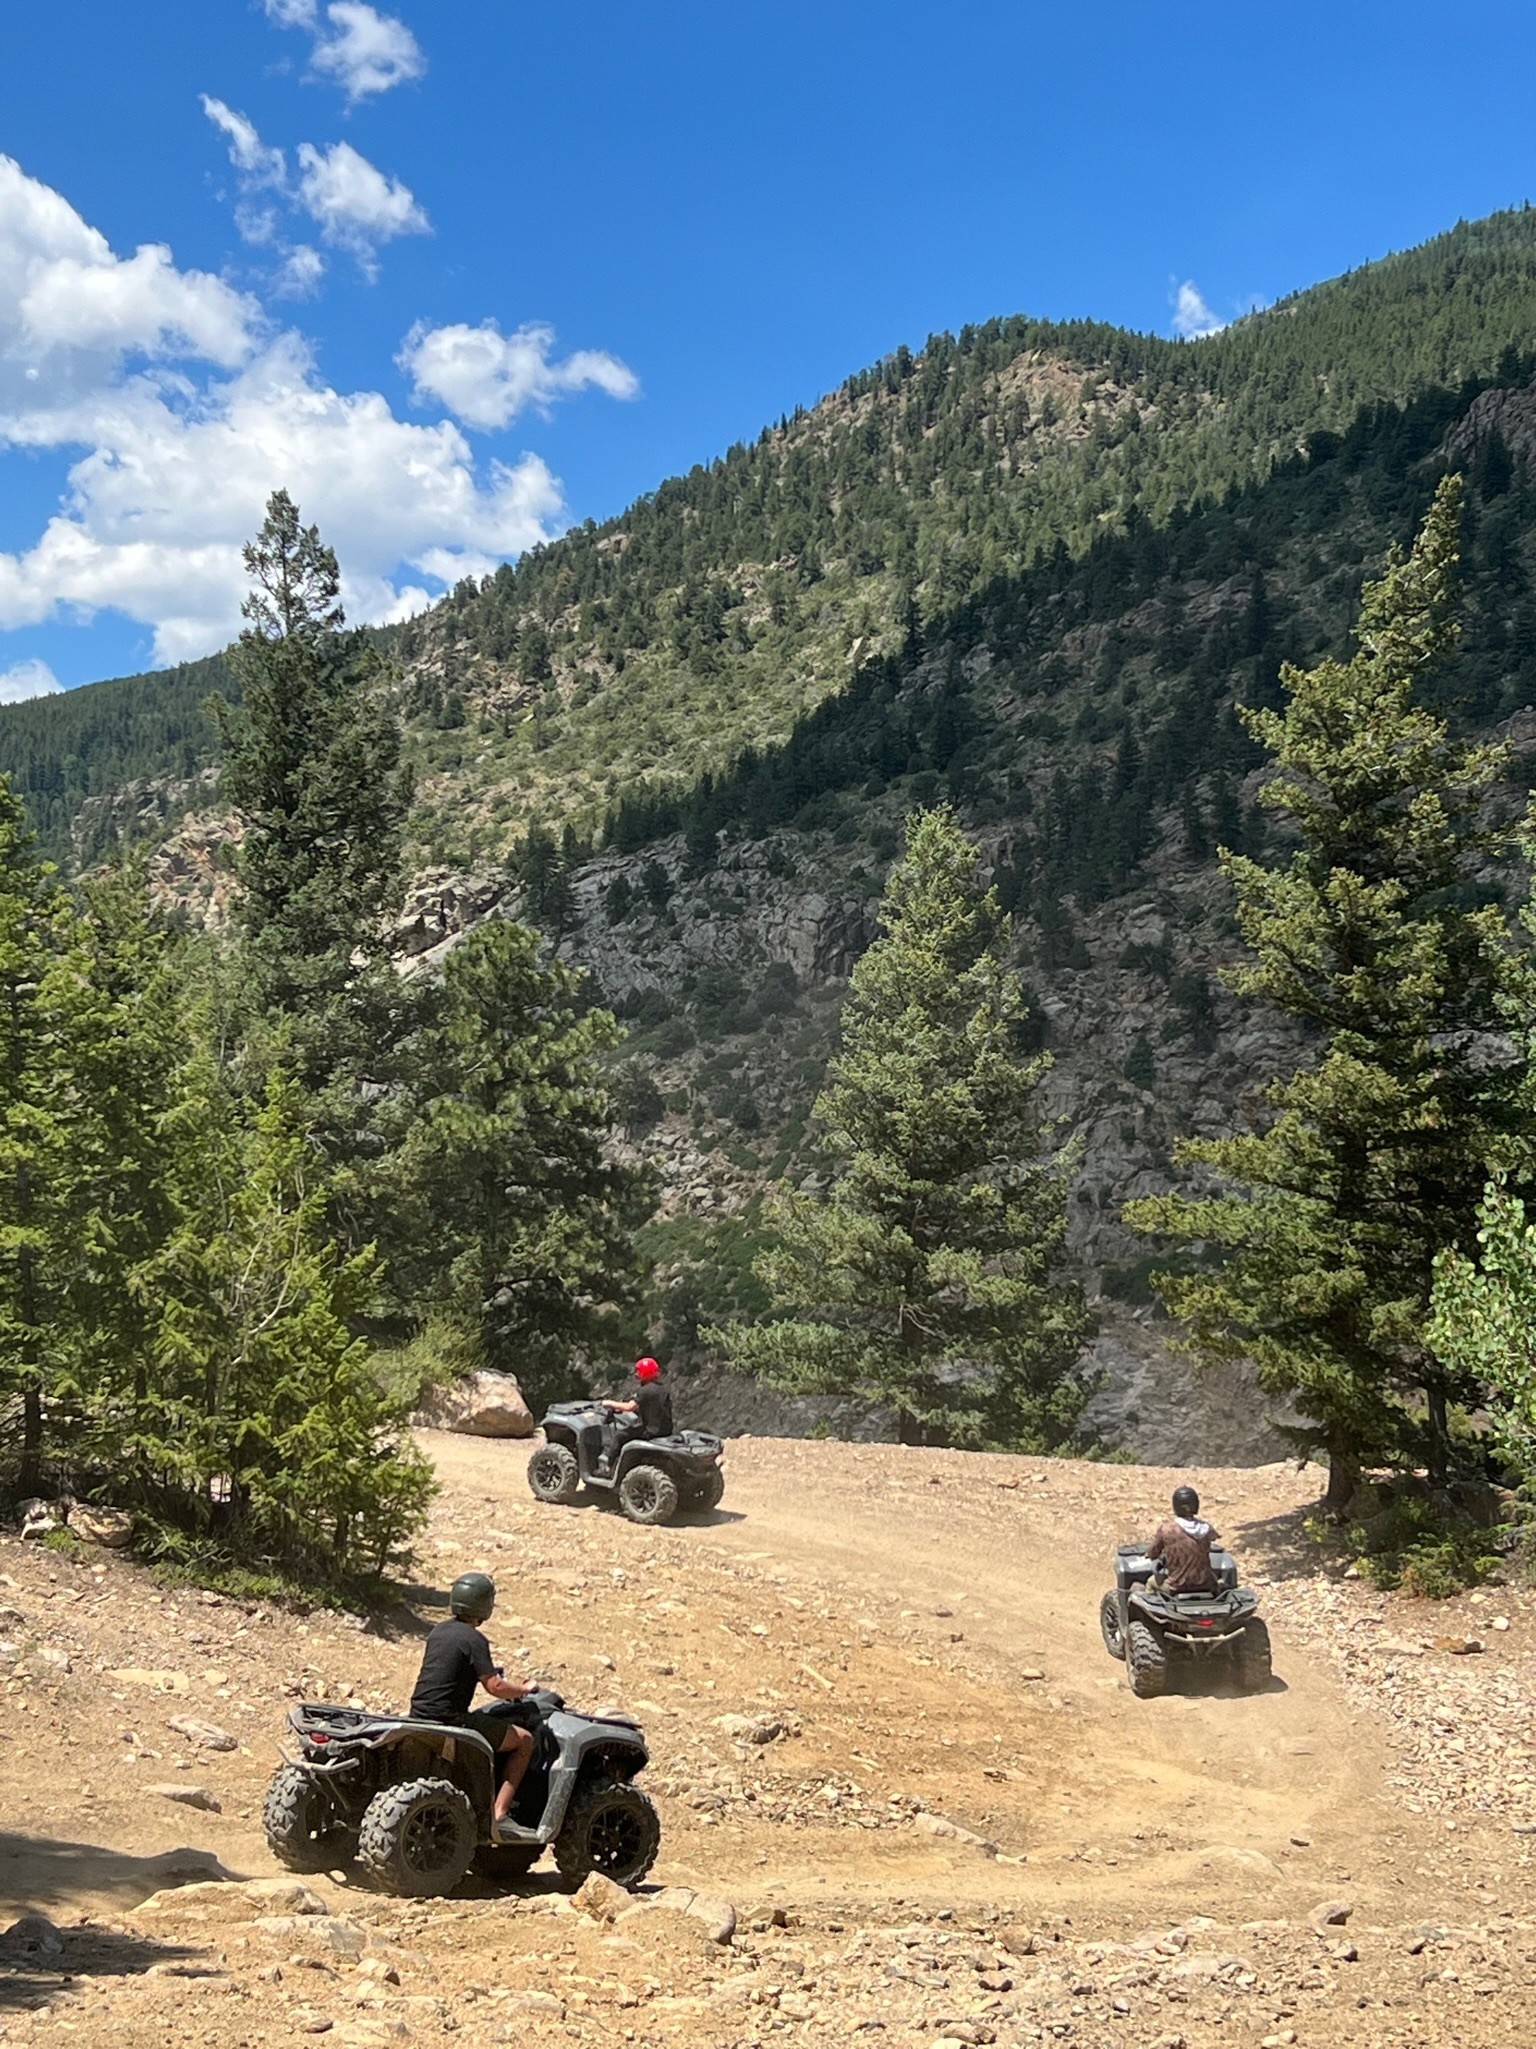 multiple ATV's riding through a dirt path in the forest